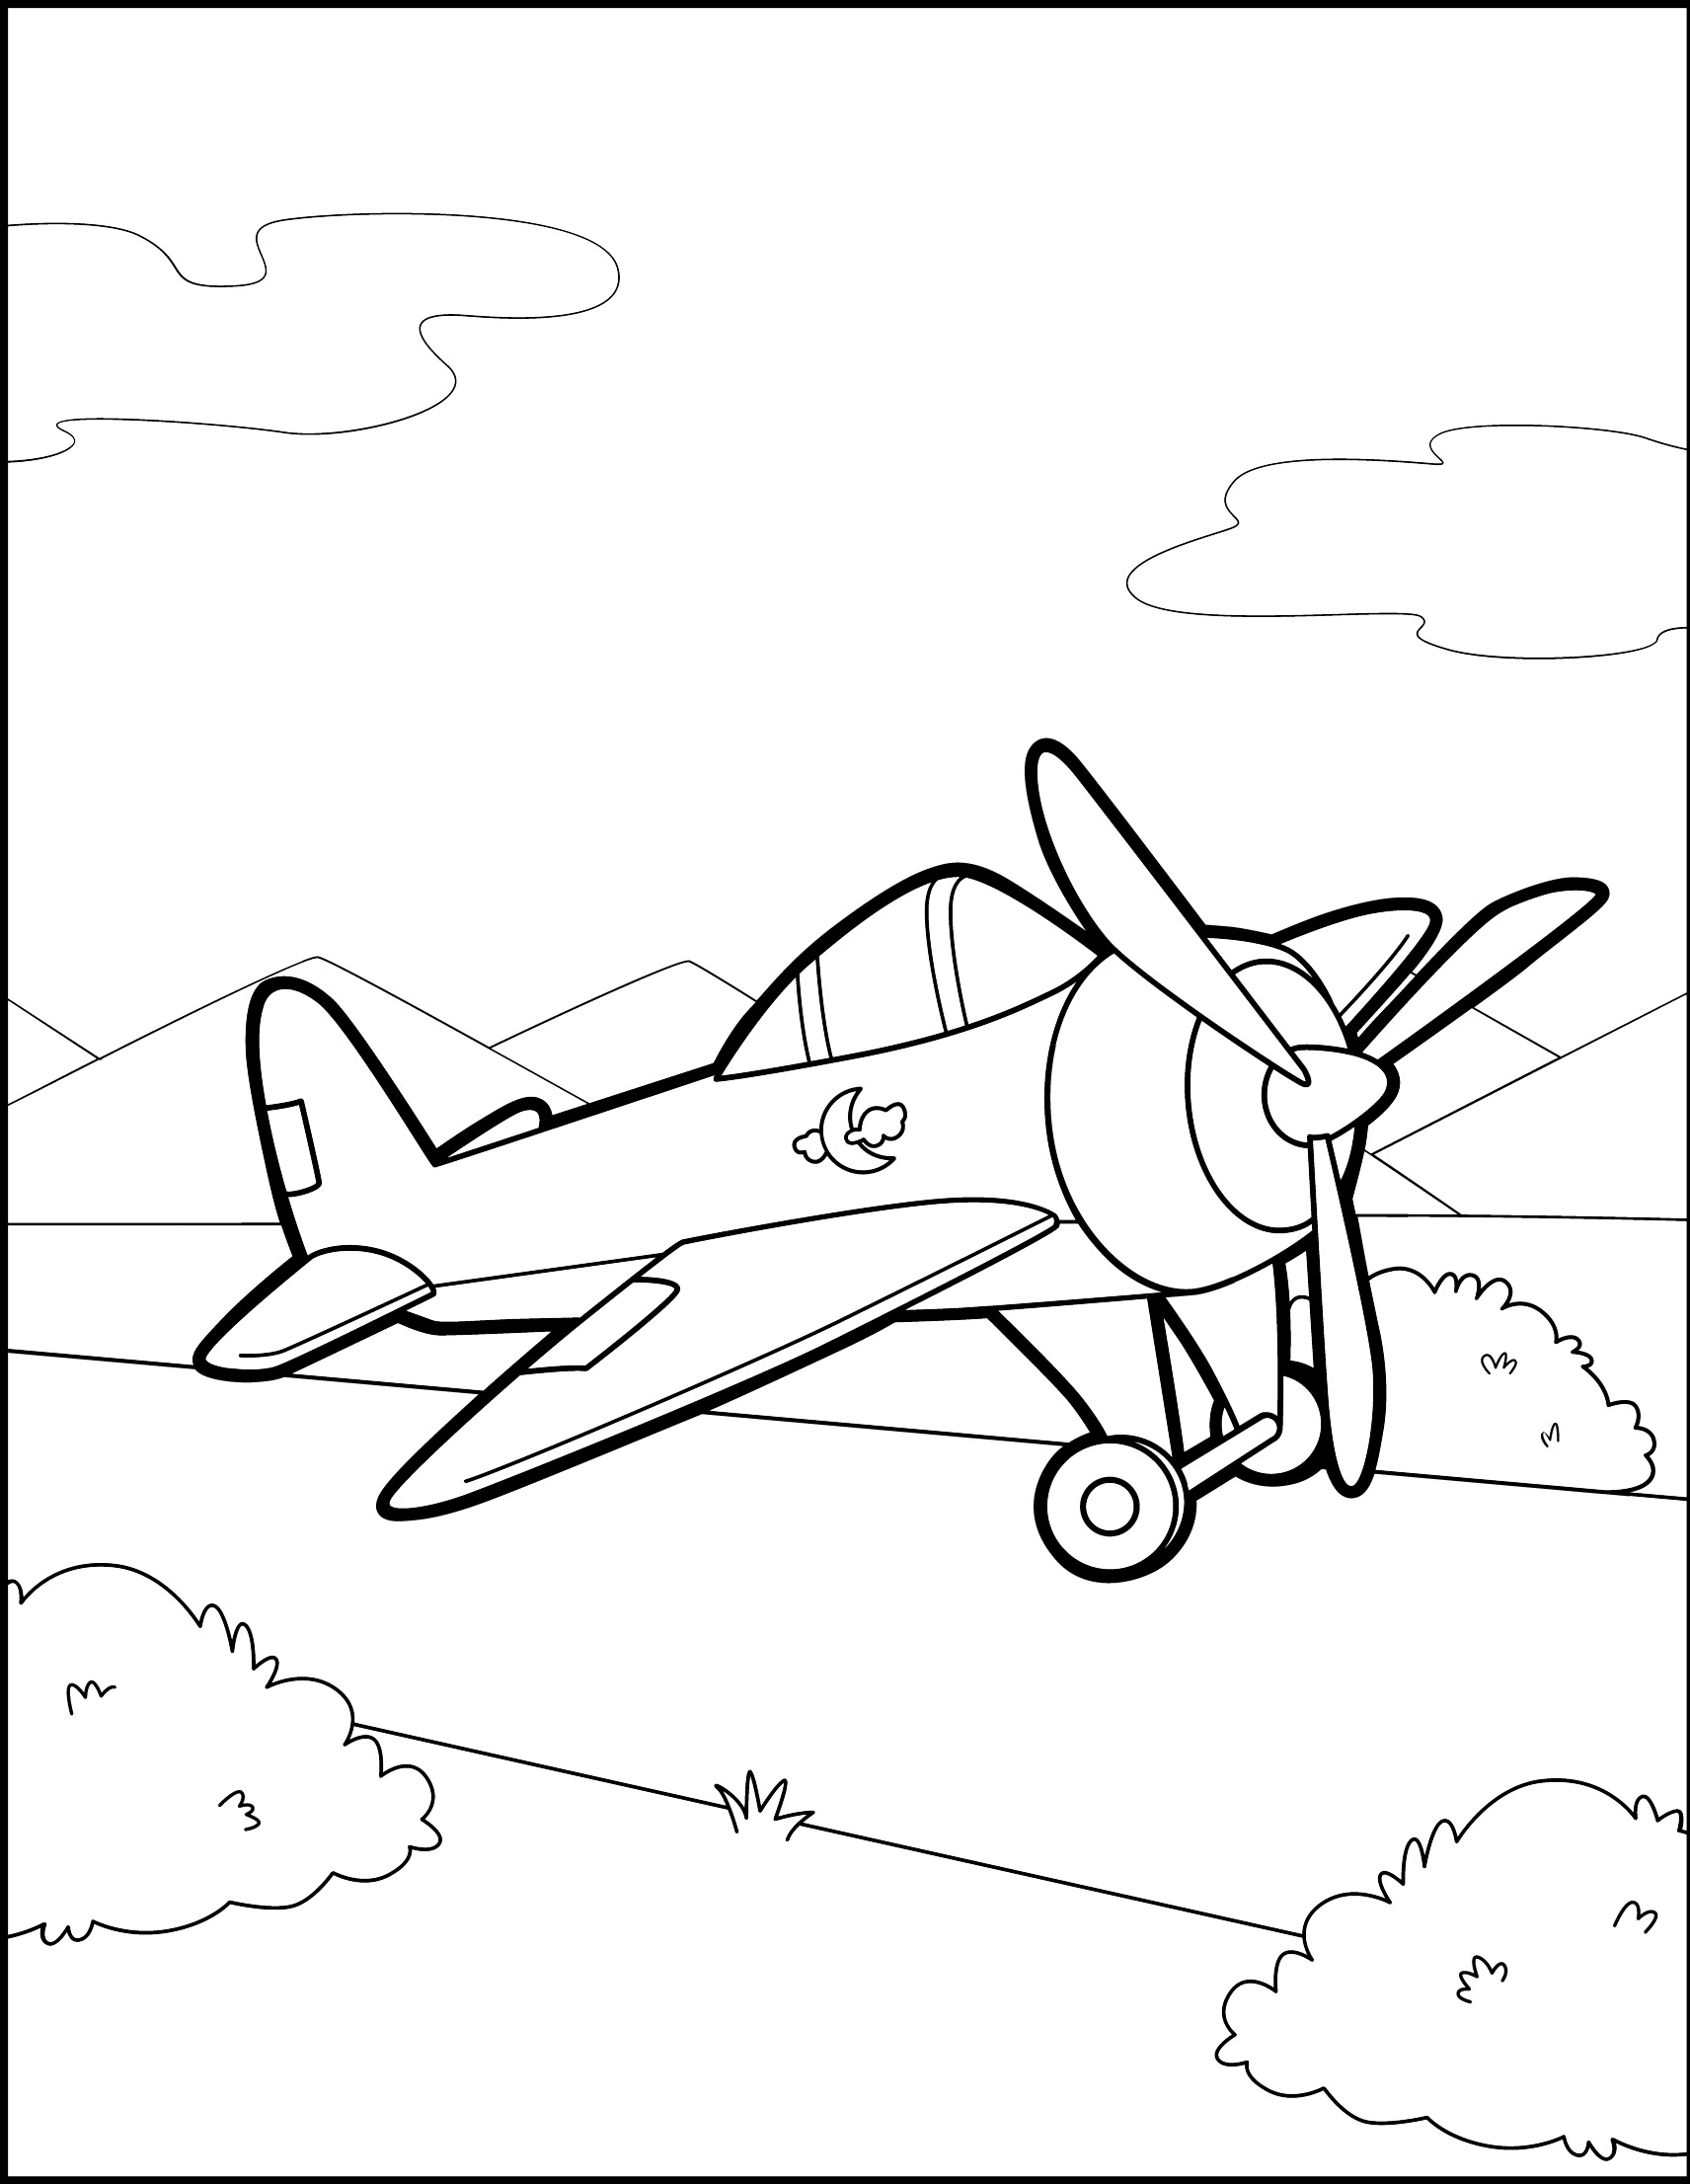 Plane at the runway coloring pages   Hellokids.com